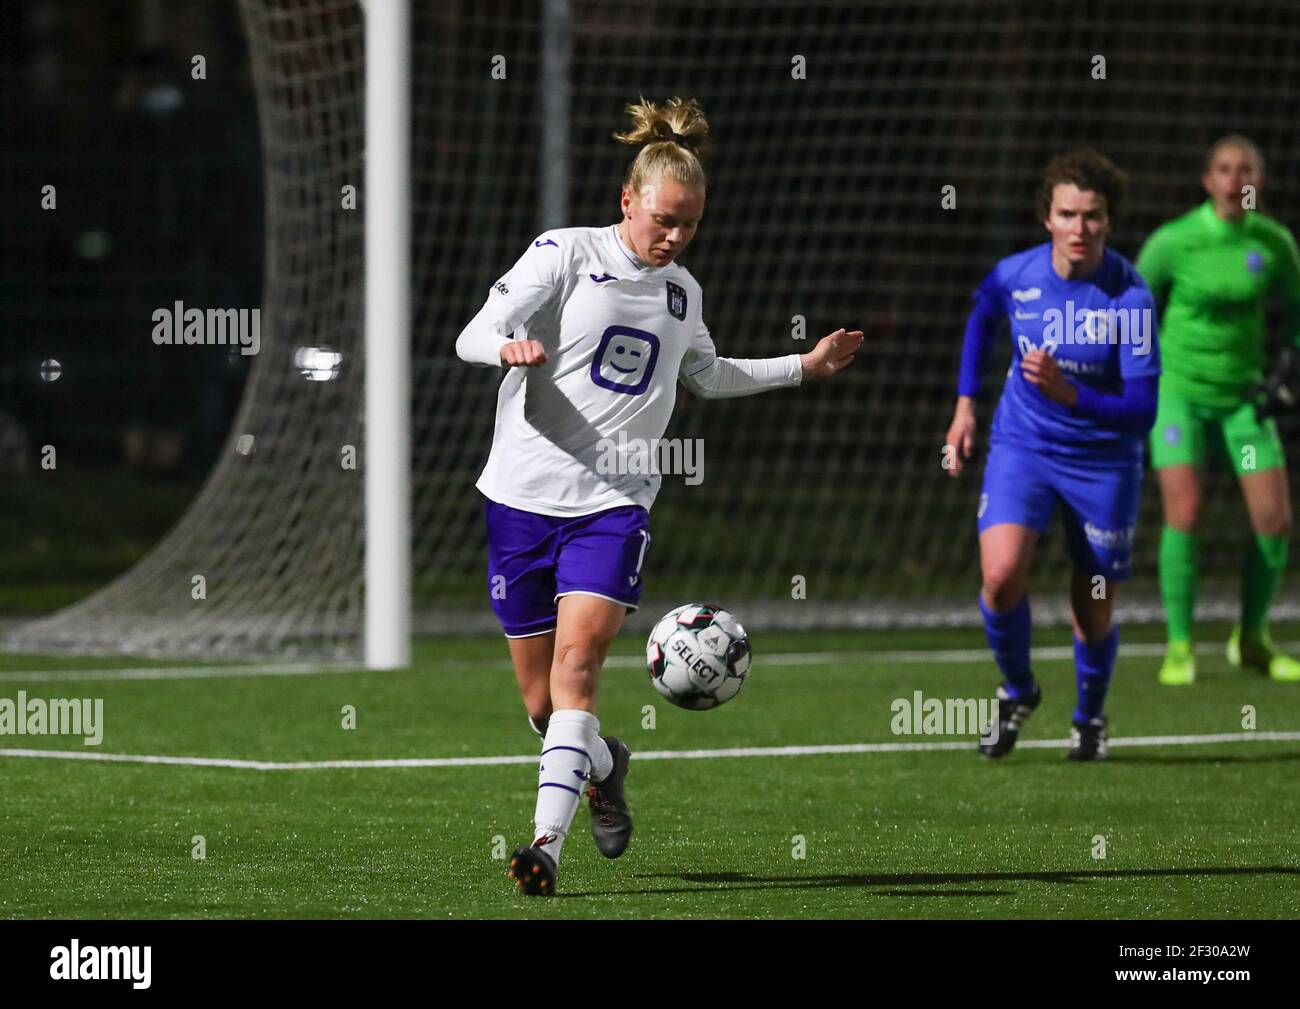 RSC ANDERLECHT VS CLUB YLA Lore Jacobs (9) of Anderlecht pictured during a  female soccer game